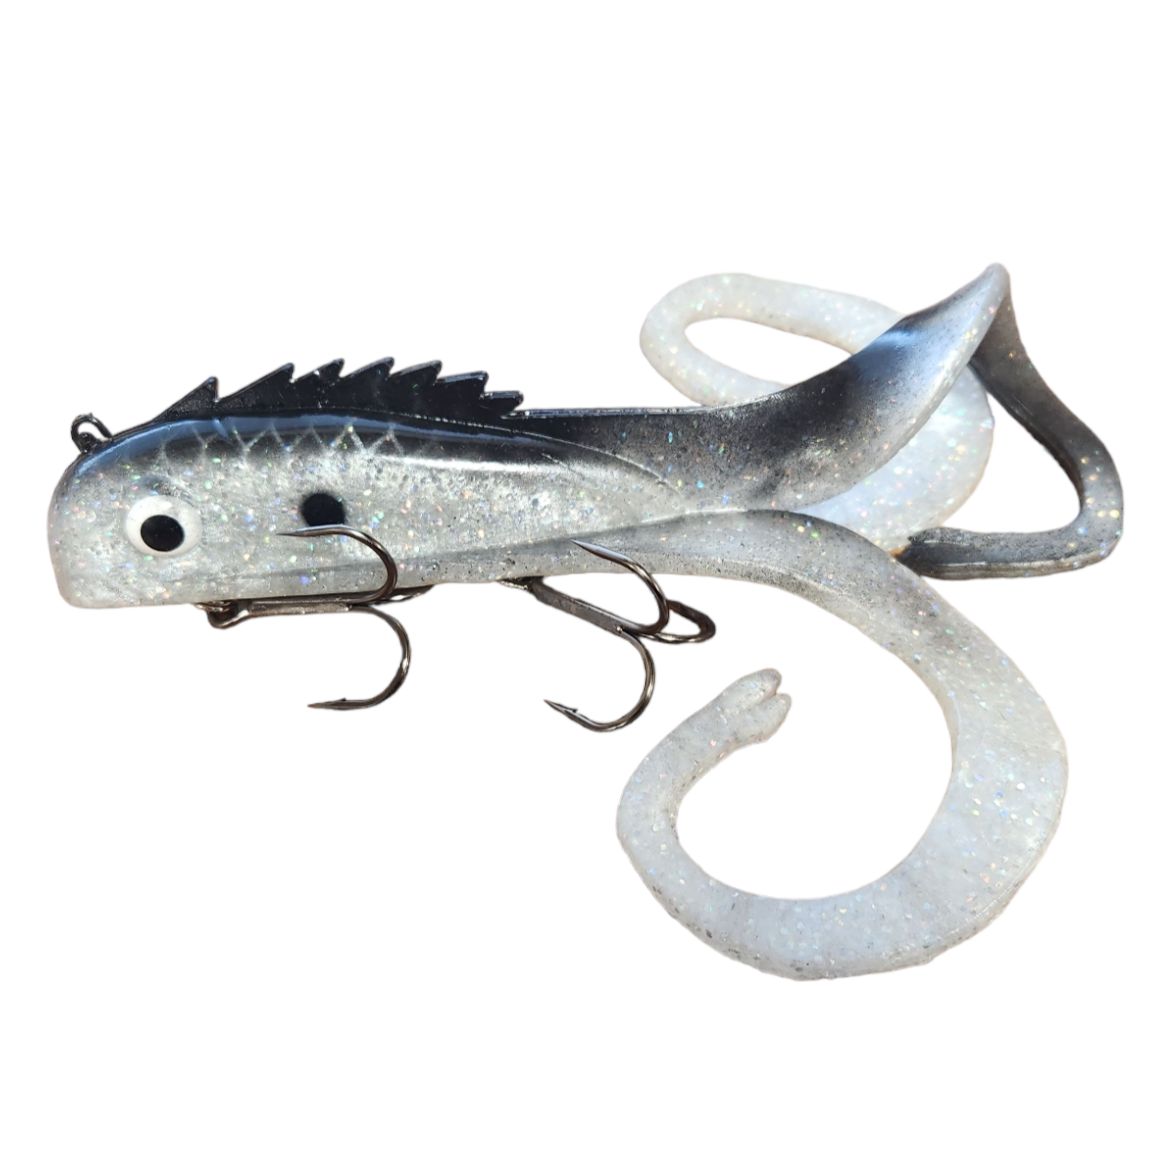 View of Rubber Chaos Tackle Medussa Mini Silver Shad available at EZOKO Pike and Musky Shop